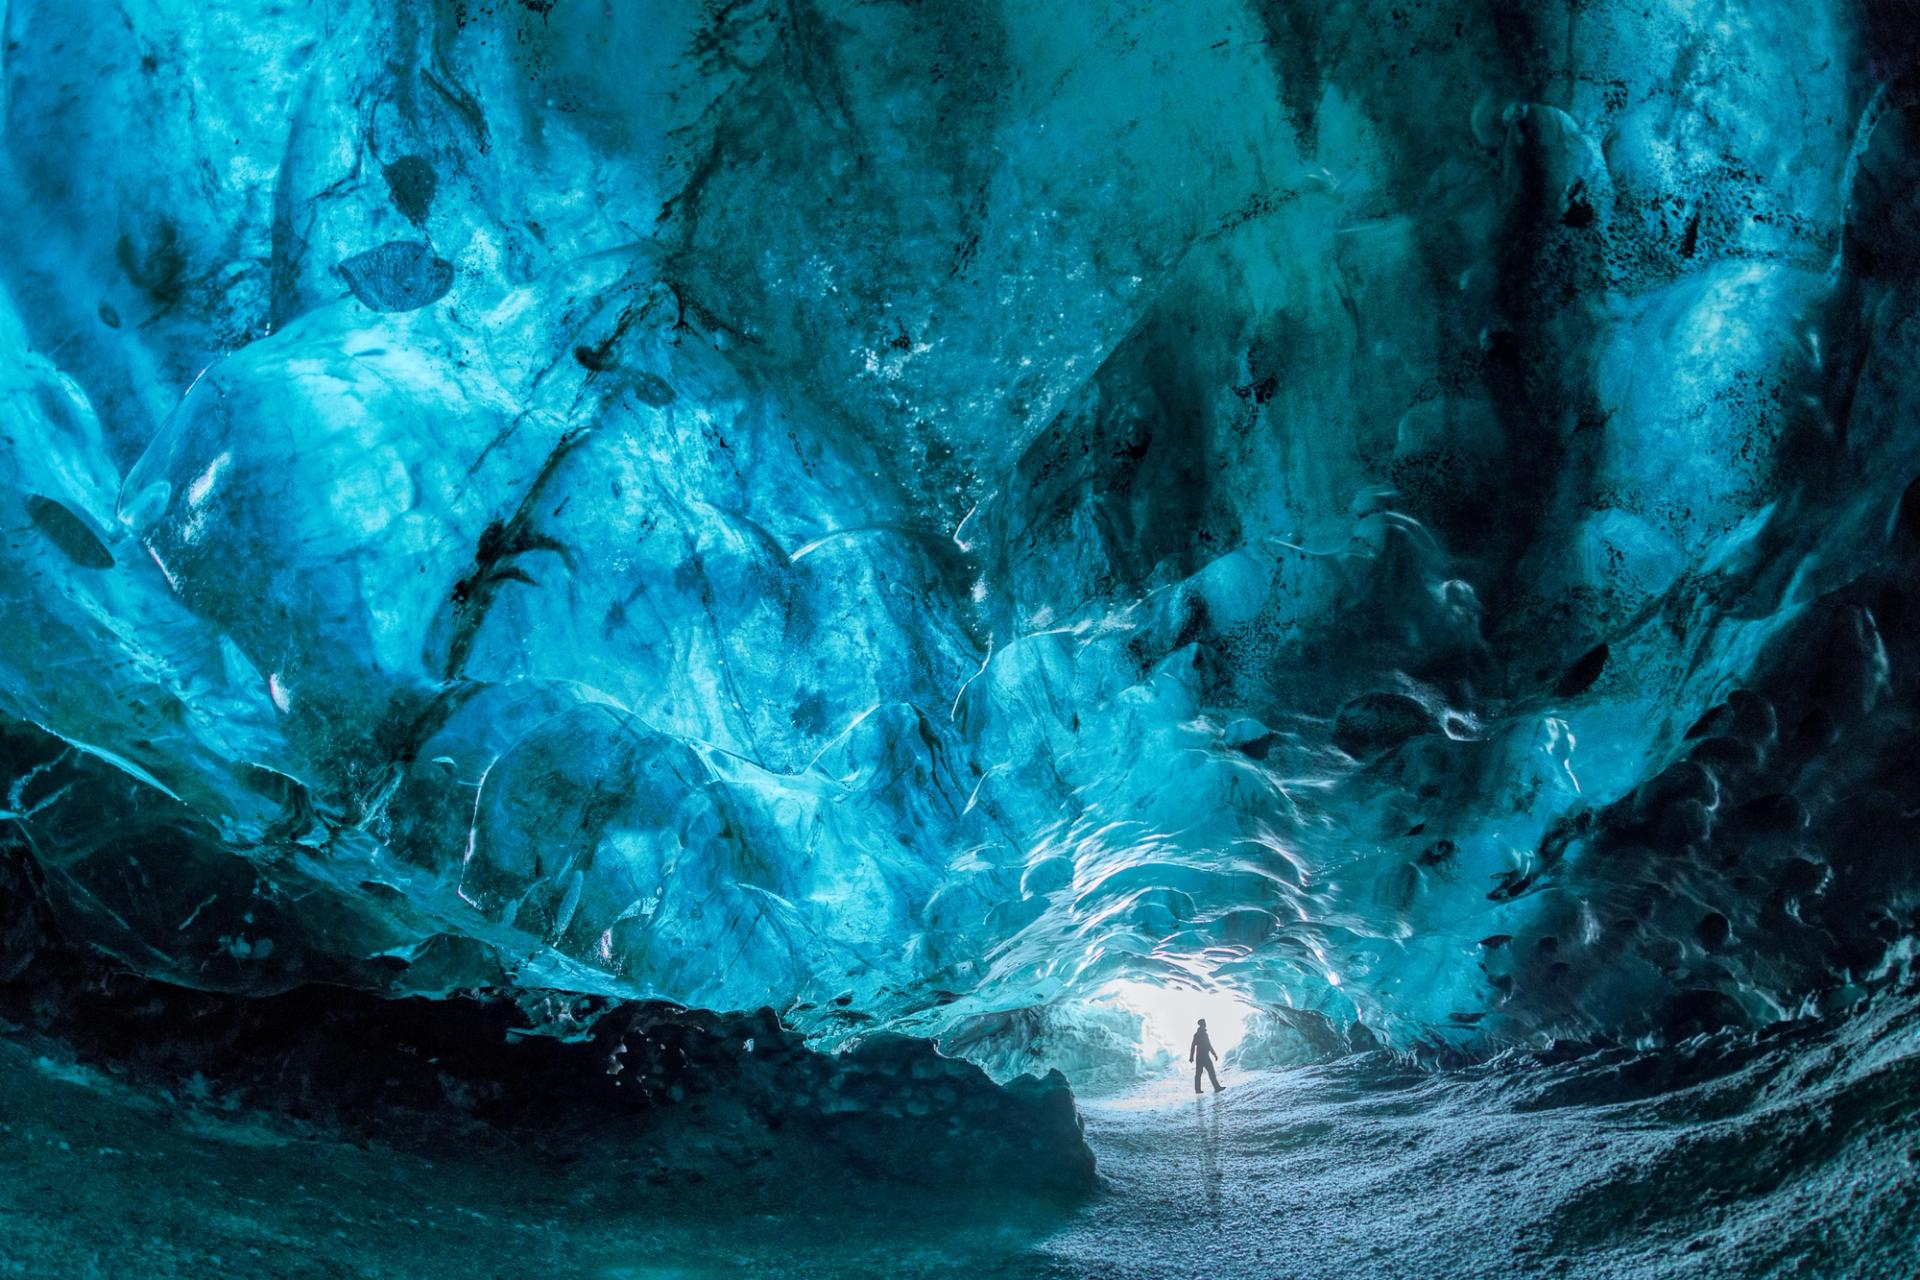 A view of an ice cave in Iceland in January